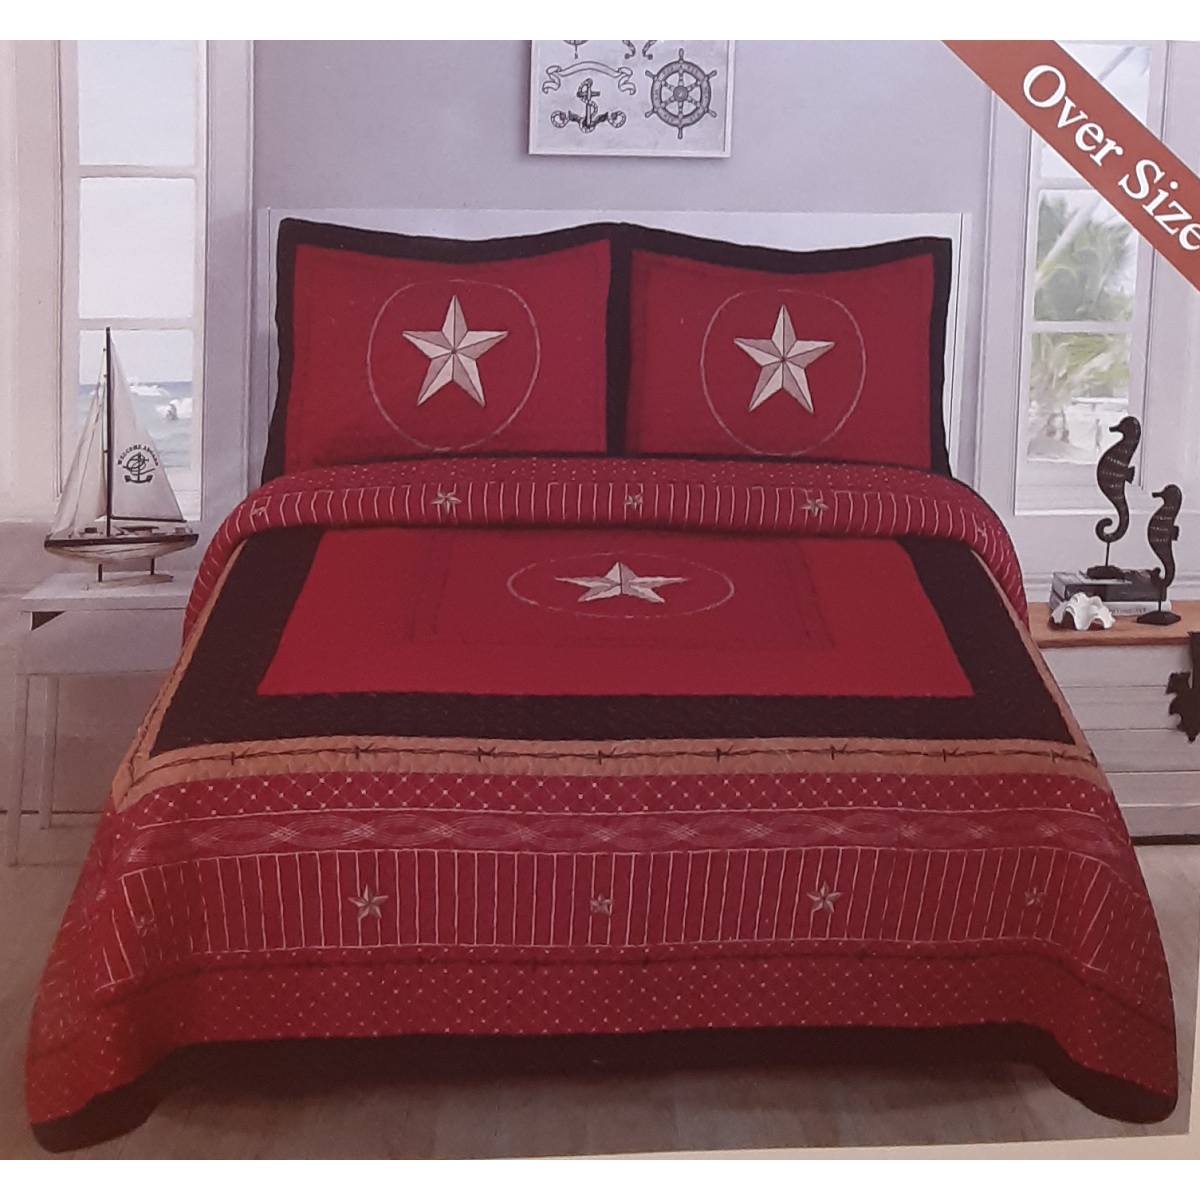 Western Design 3 Piece Quilted Bedspread Set, Stars and Barbed Wire Design